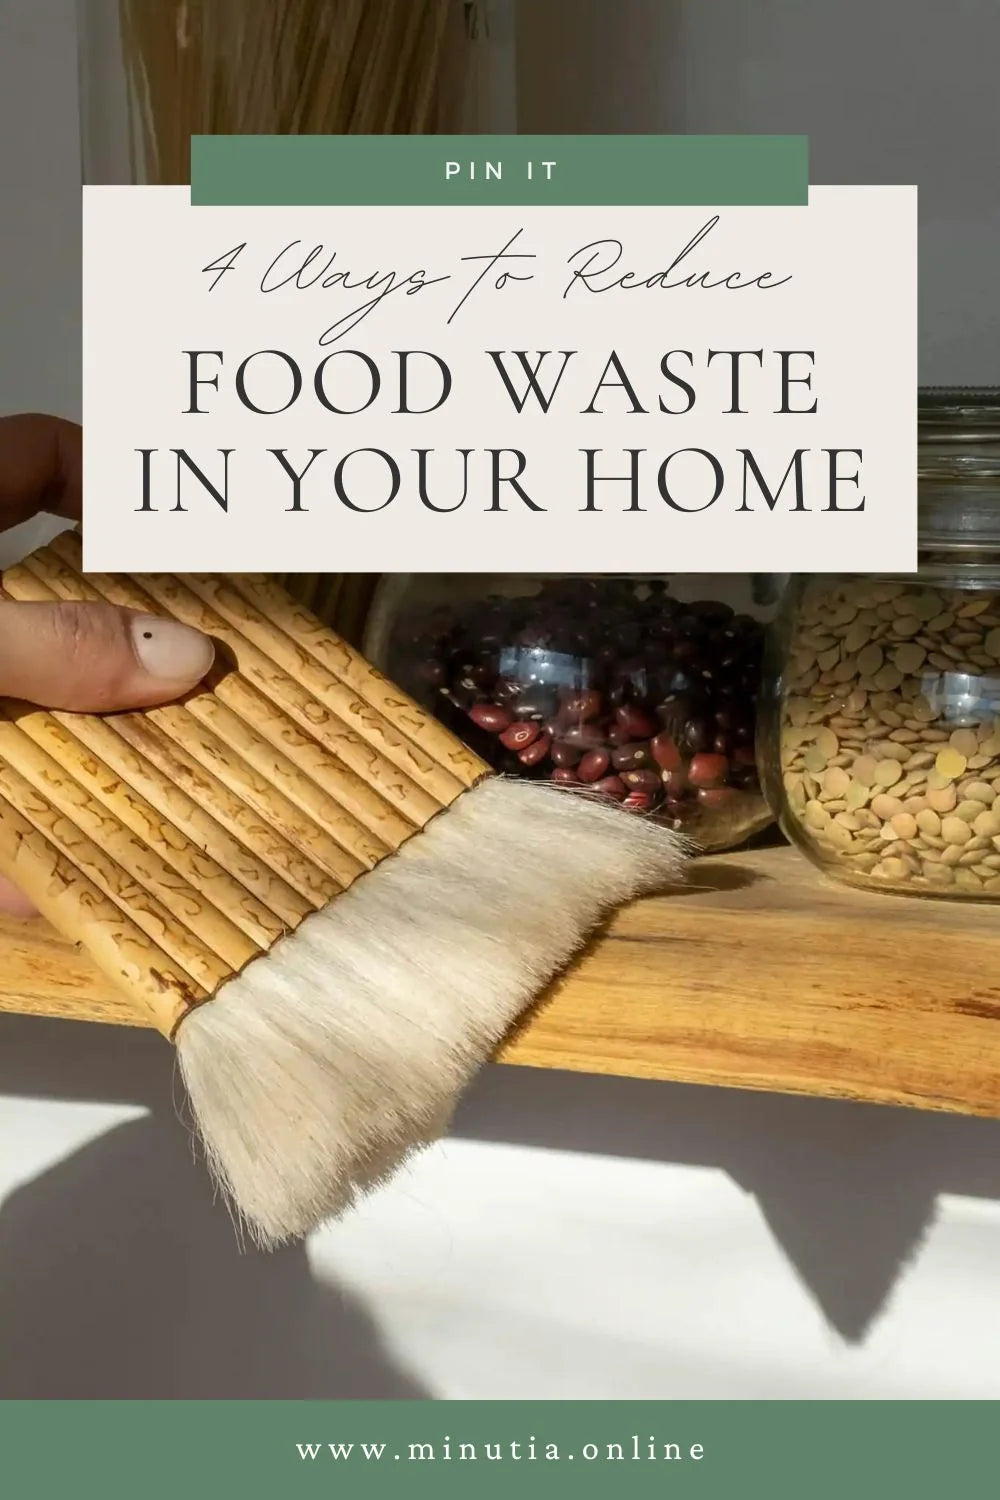 4 Effective Ways To Reduce Food Waste In Your Home